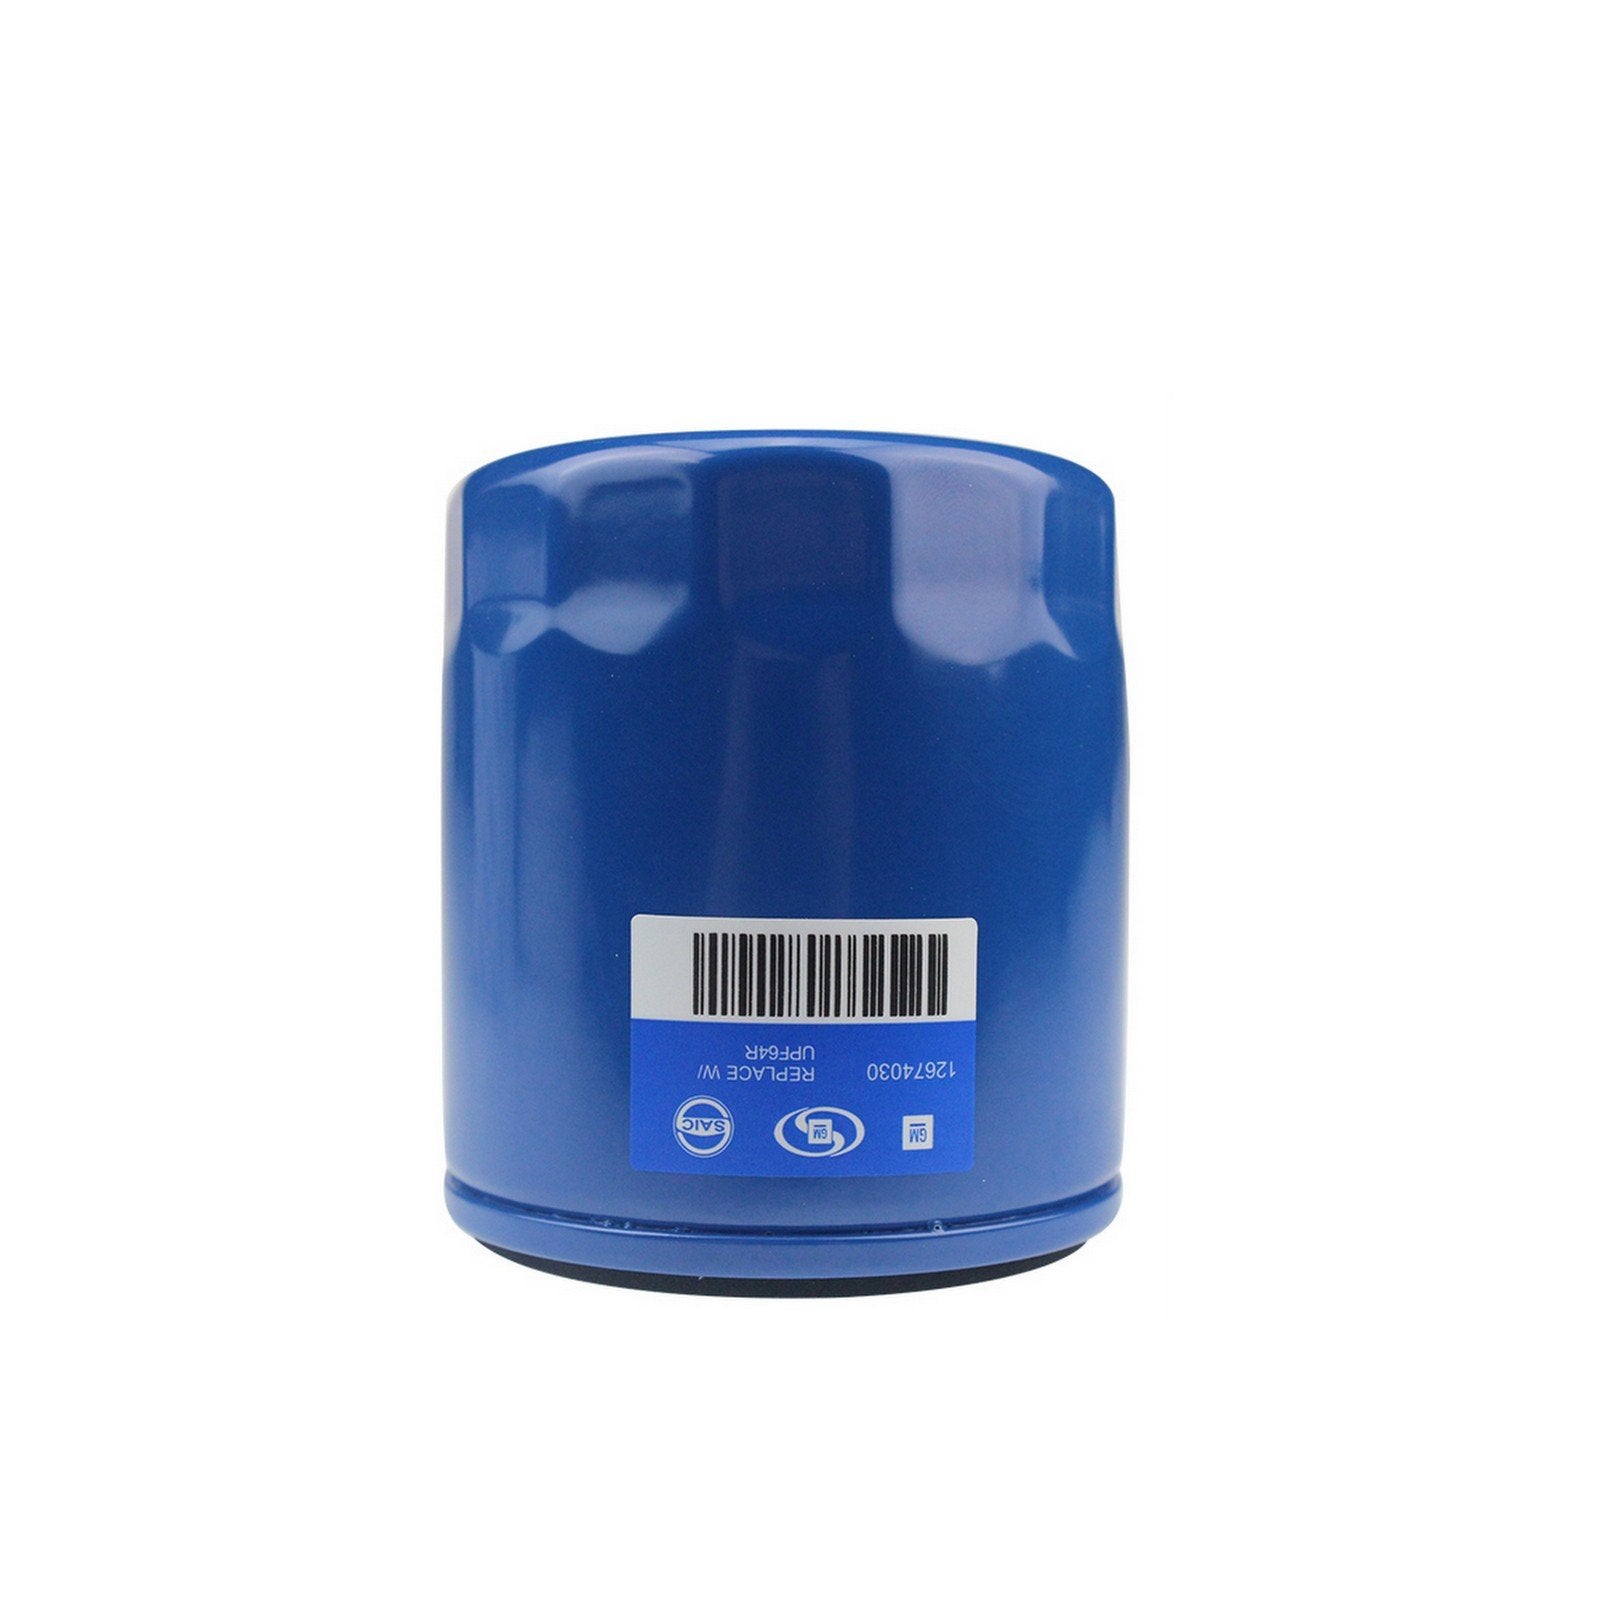 OIL FILTER, GENUINE FOR MG ZS (MG GENUINE PARTS)